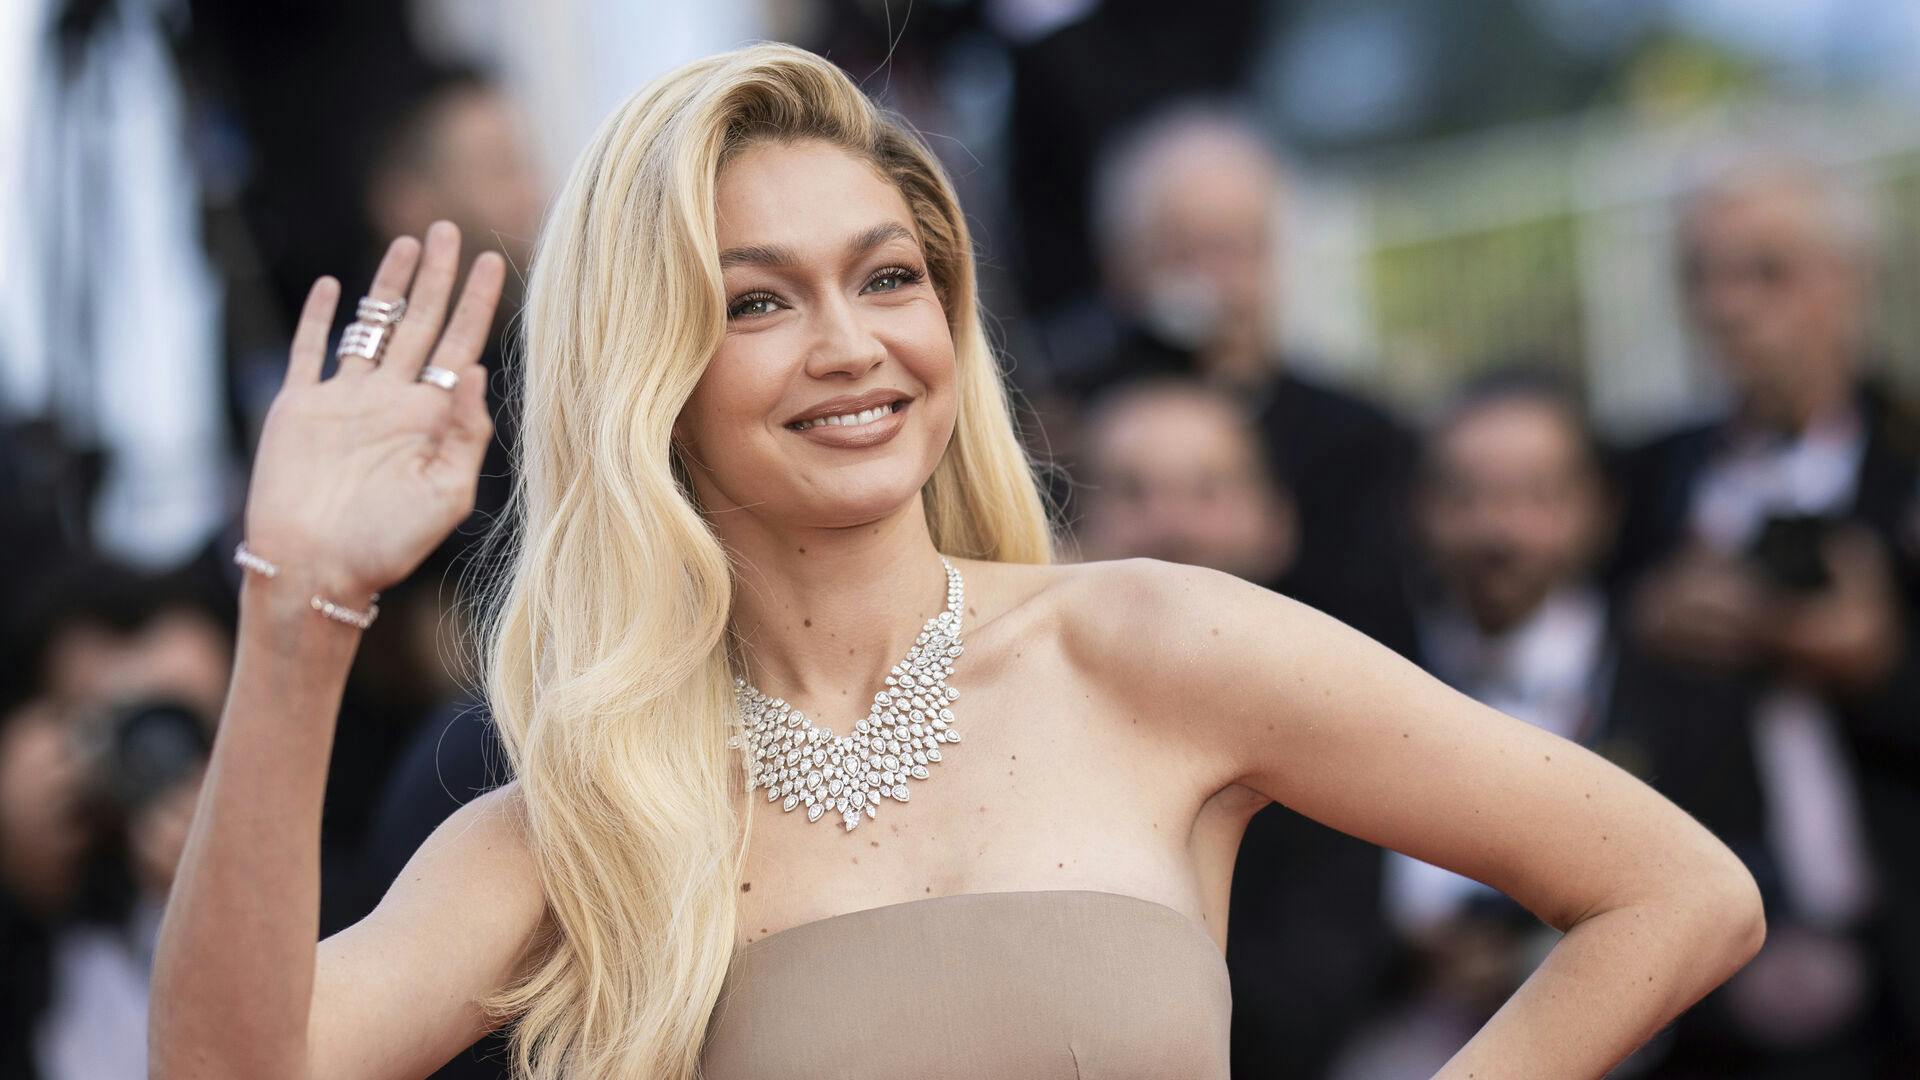 Gigi Hadid poses for photographers upon arrival at the premiere of the film 'Firebrand' at the 76th international film festival, Cannes, southern France, Sunday, May 21, 2023. (Photo by Vianney Le Caer/Invision/AP)